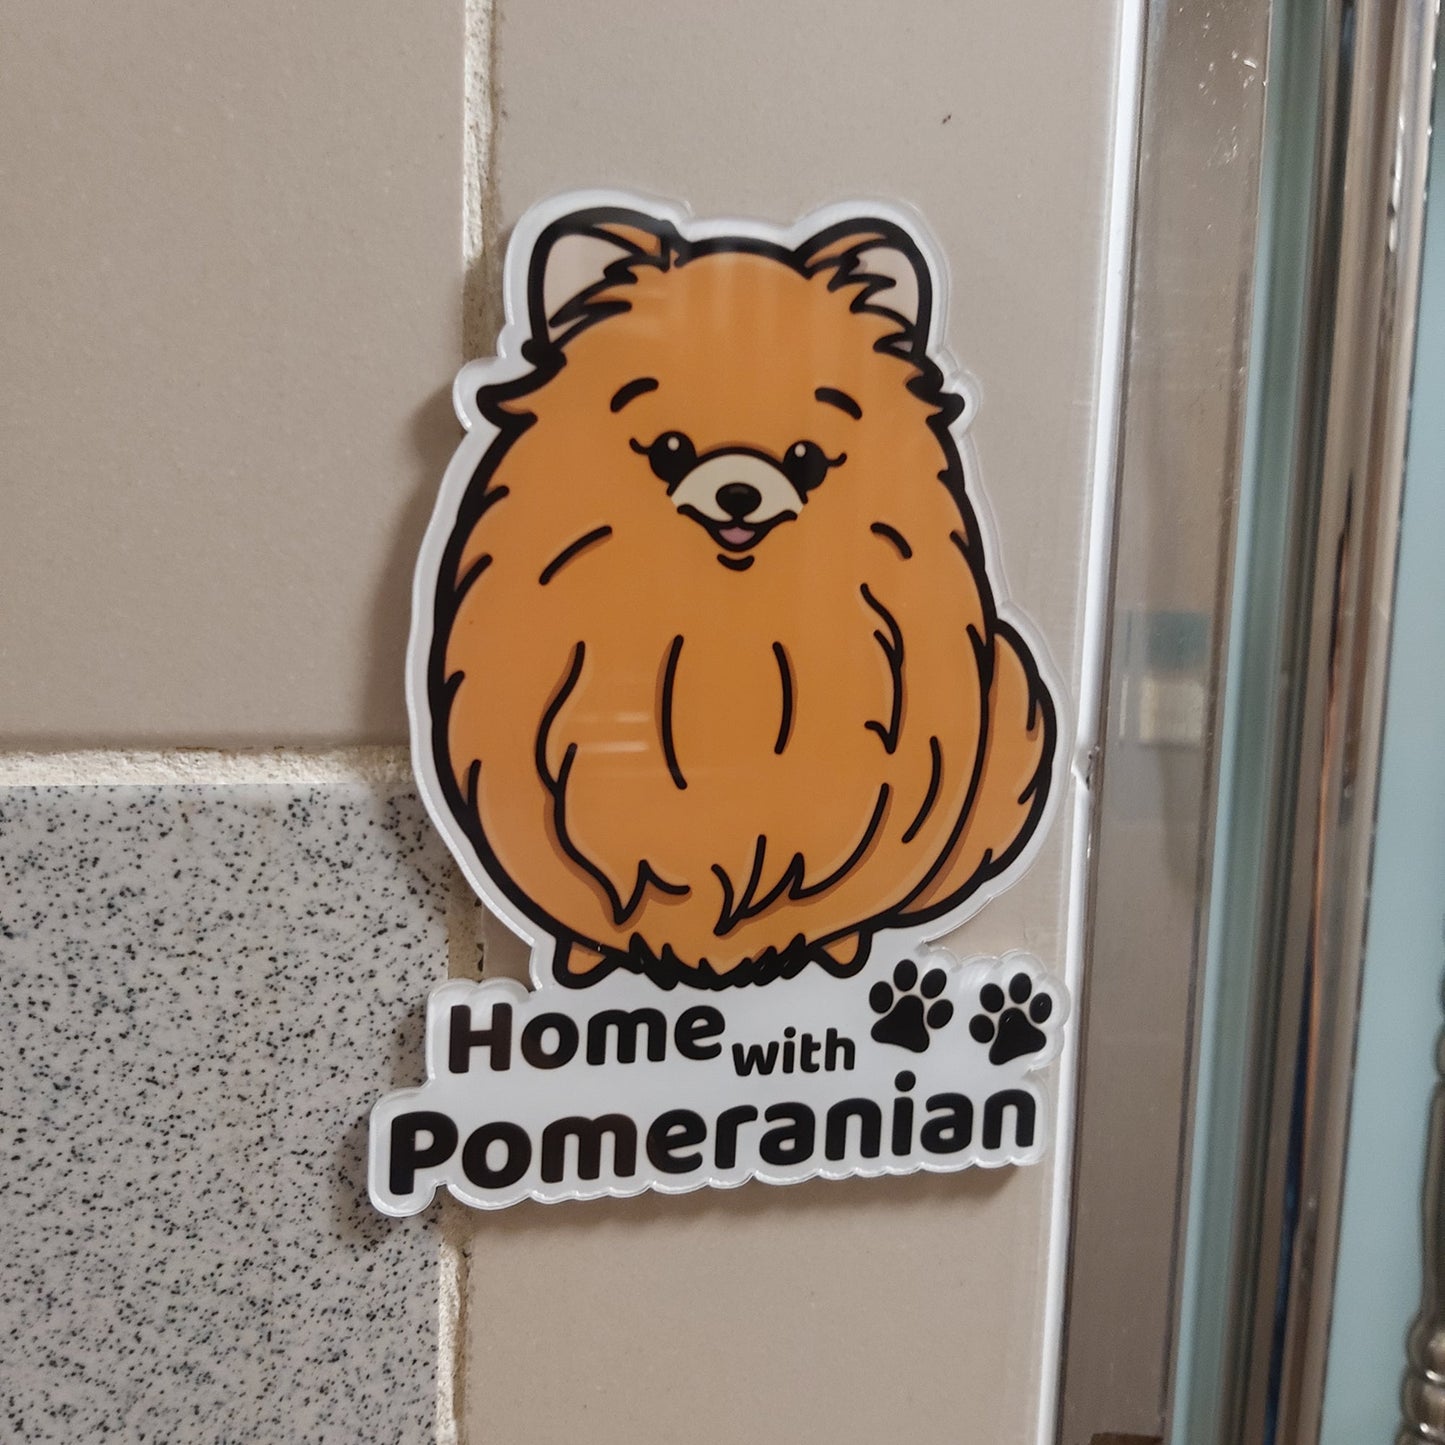 Home with Pomeranian Squirrel Dog Pomeranian House Numbers